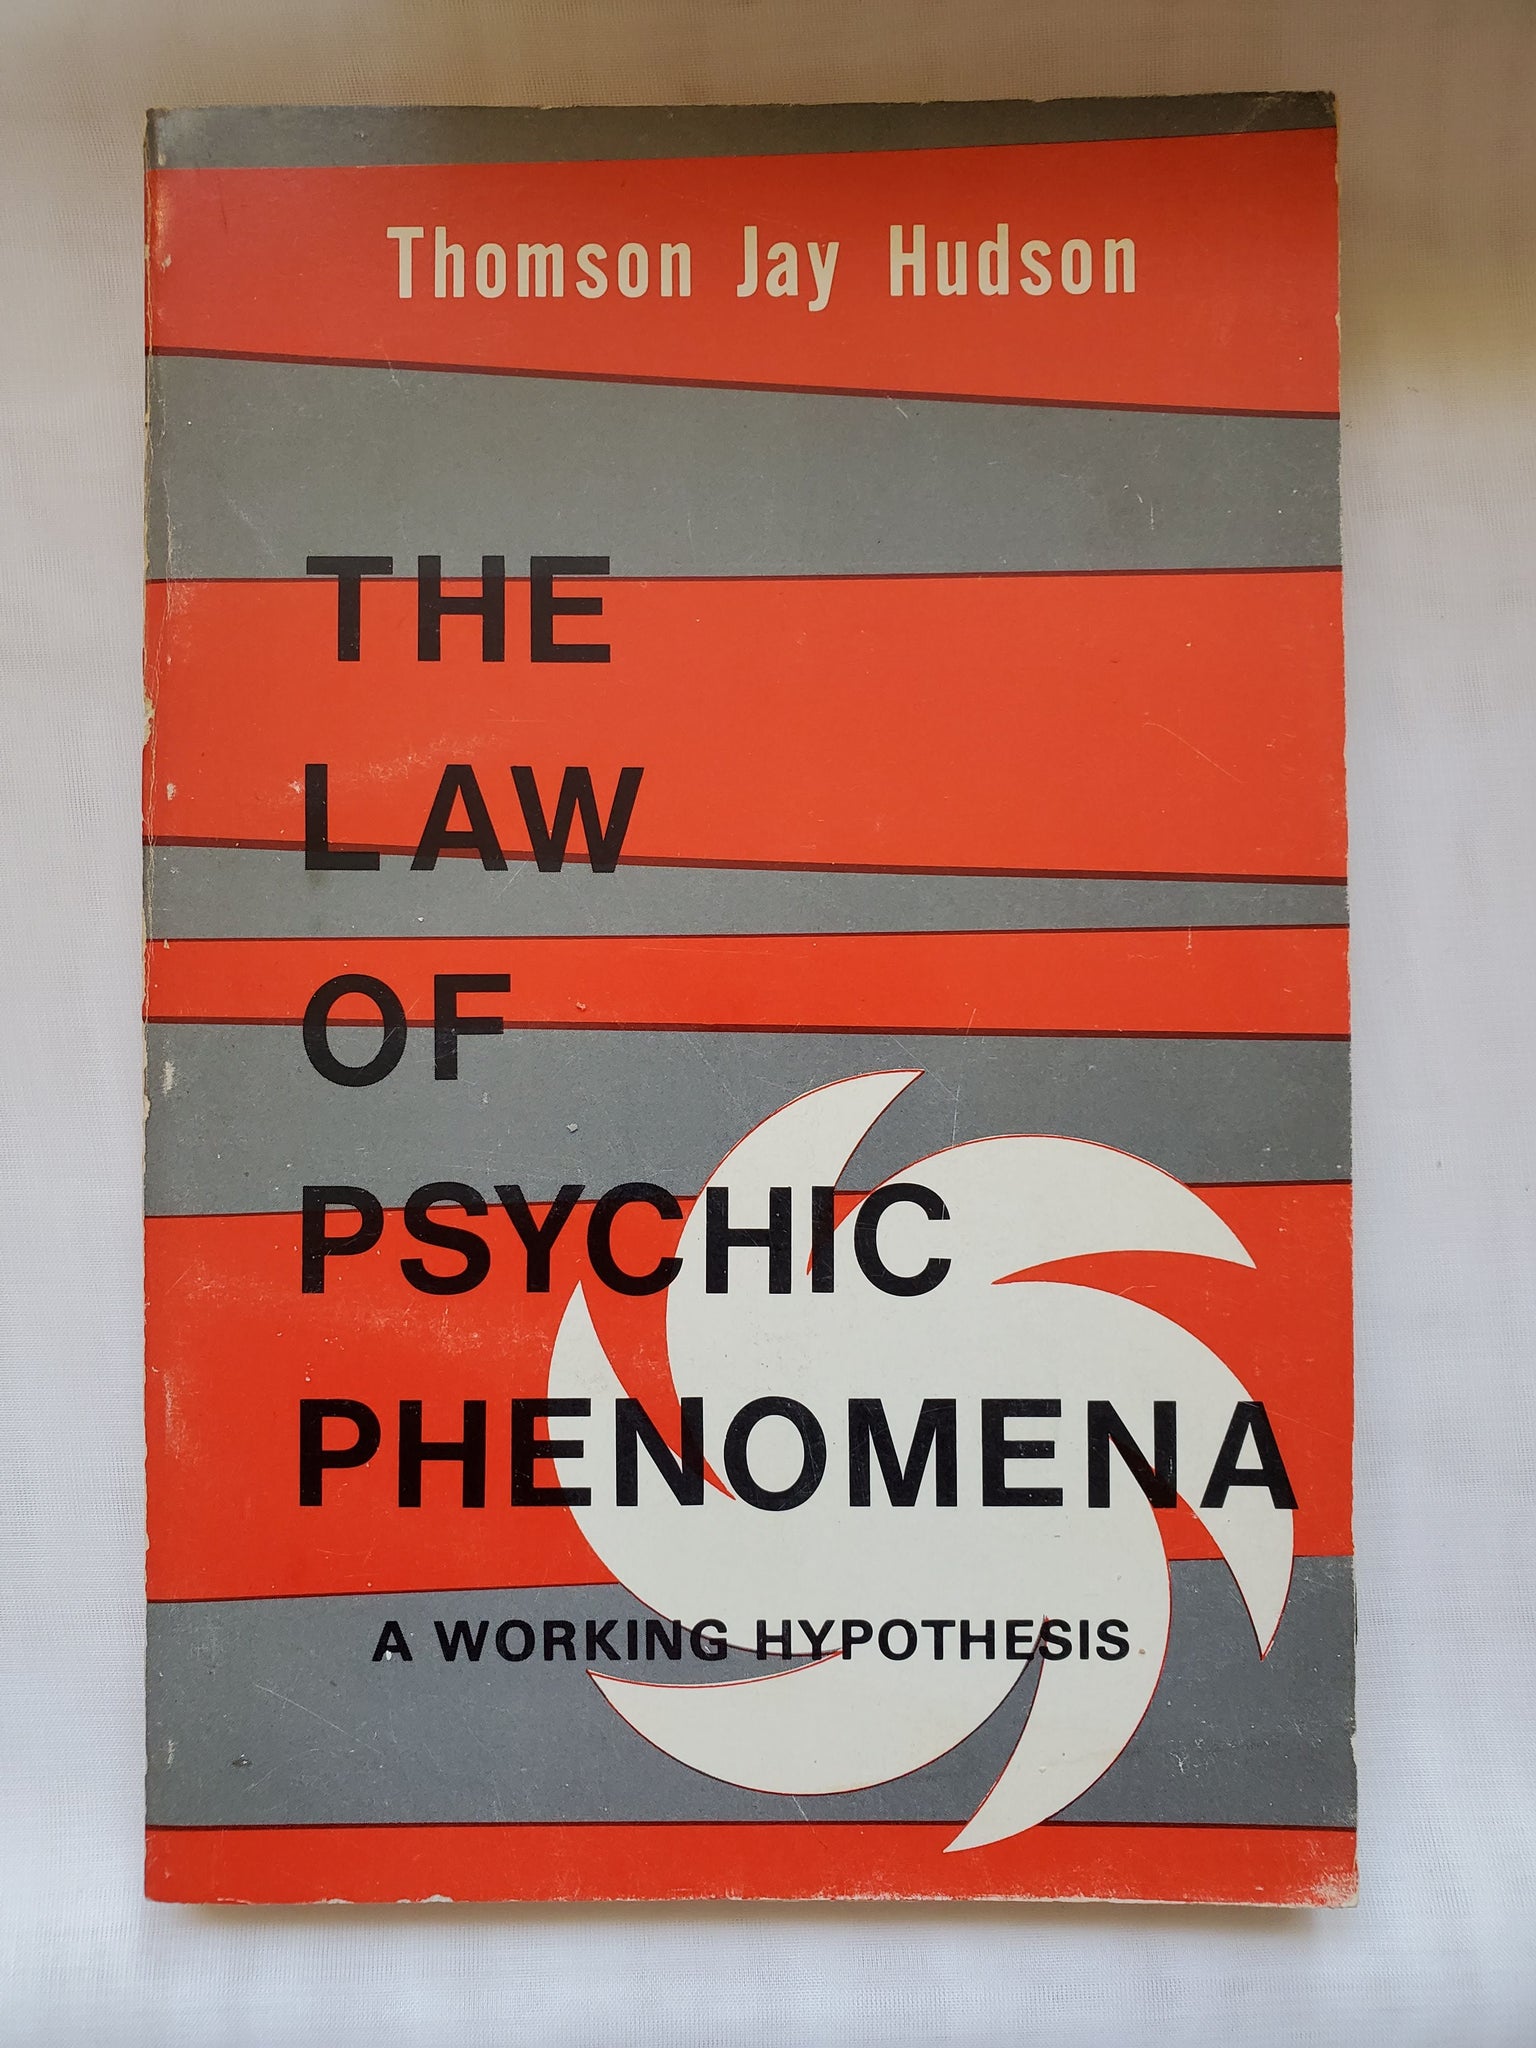 The Law of Psychic Phenomena by Thomson Jay Hudson, (1893) reprint 1970